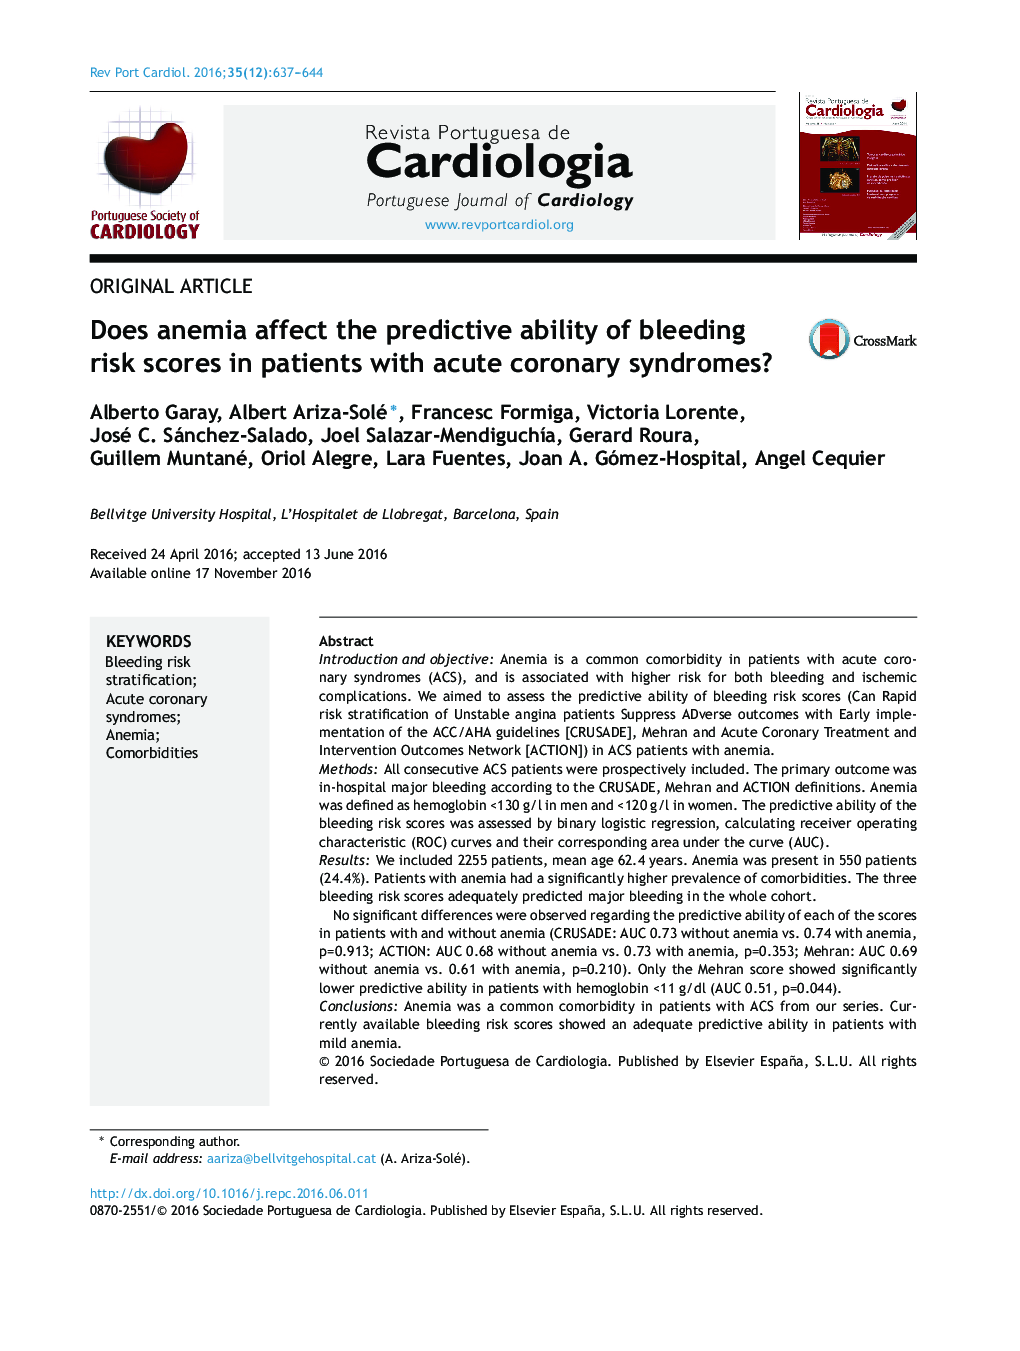 Does anemia affect the predictive ability of bleeding risk scores in patients with acute coronary syndromes?